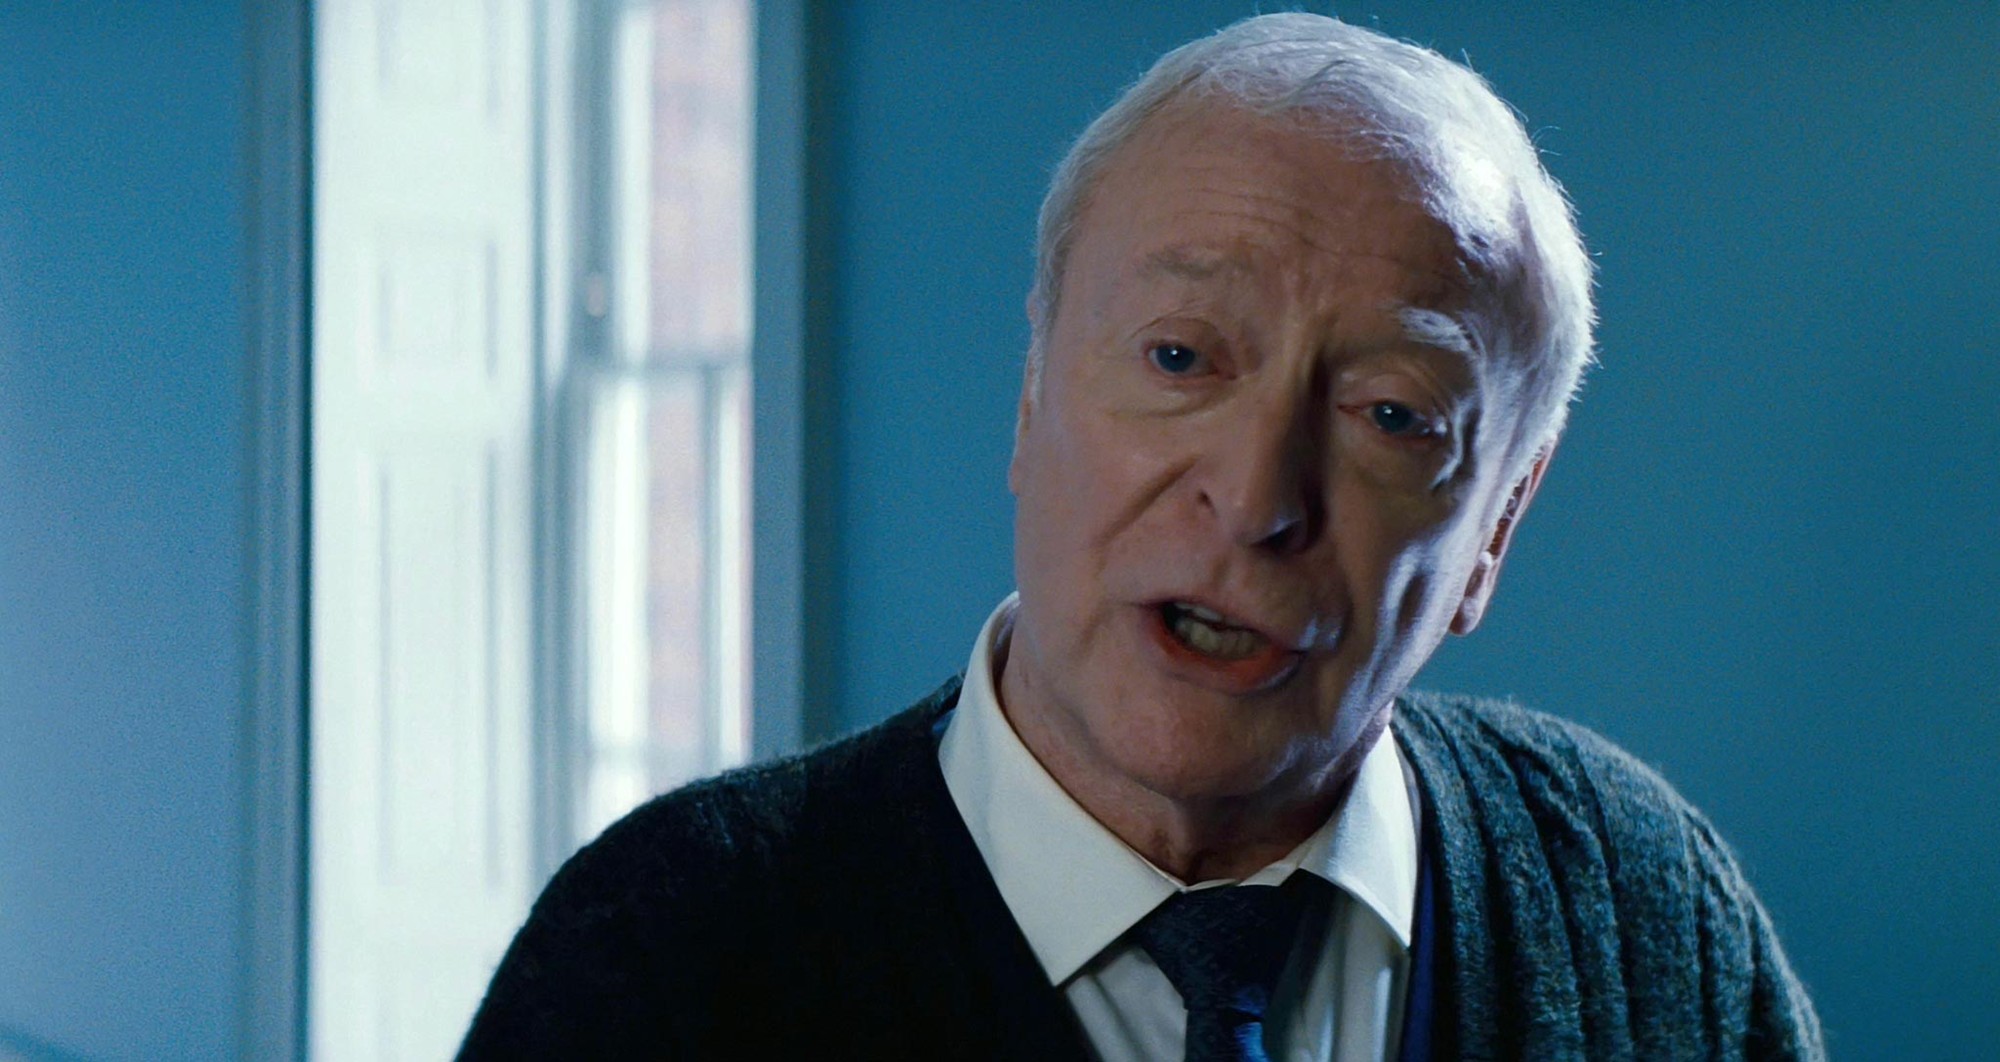 Michael Caine stars as Alfred in Warner Bros. Pictures' The Dark Knight Rises (2012)